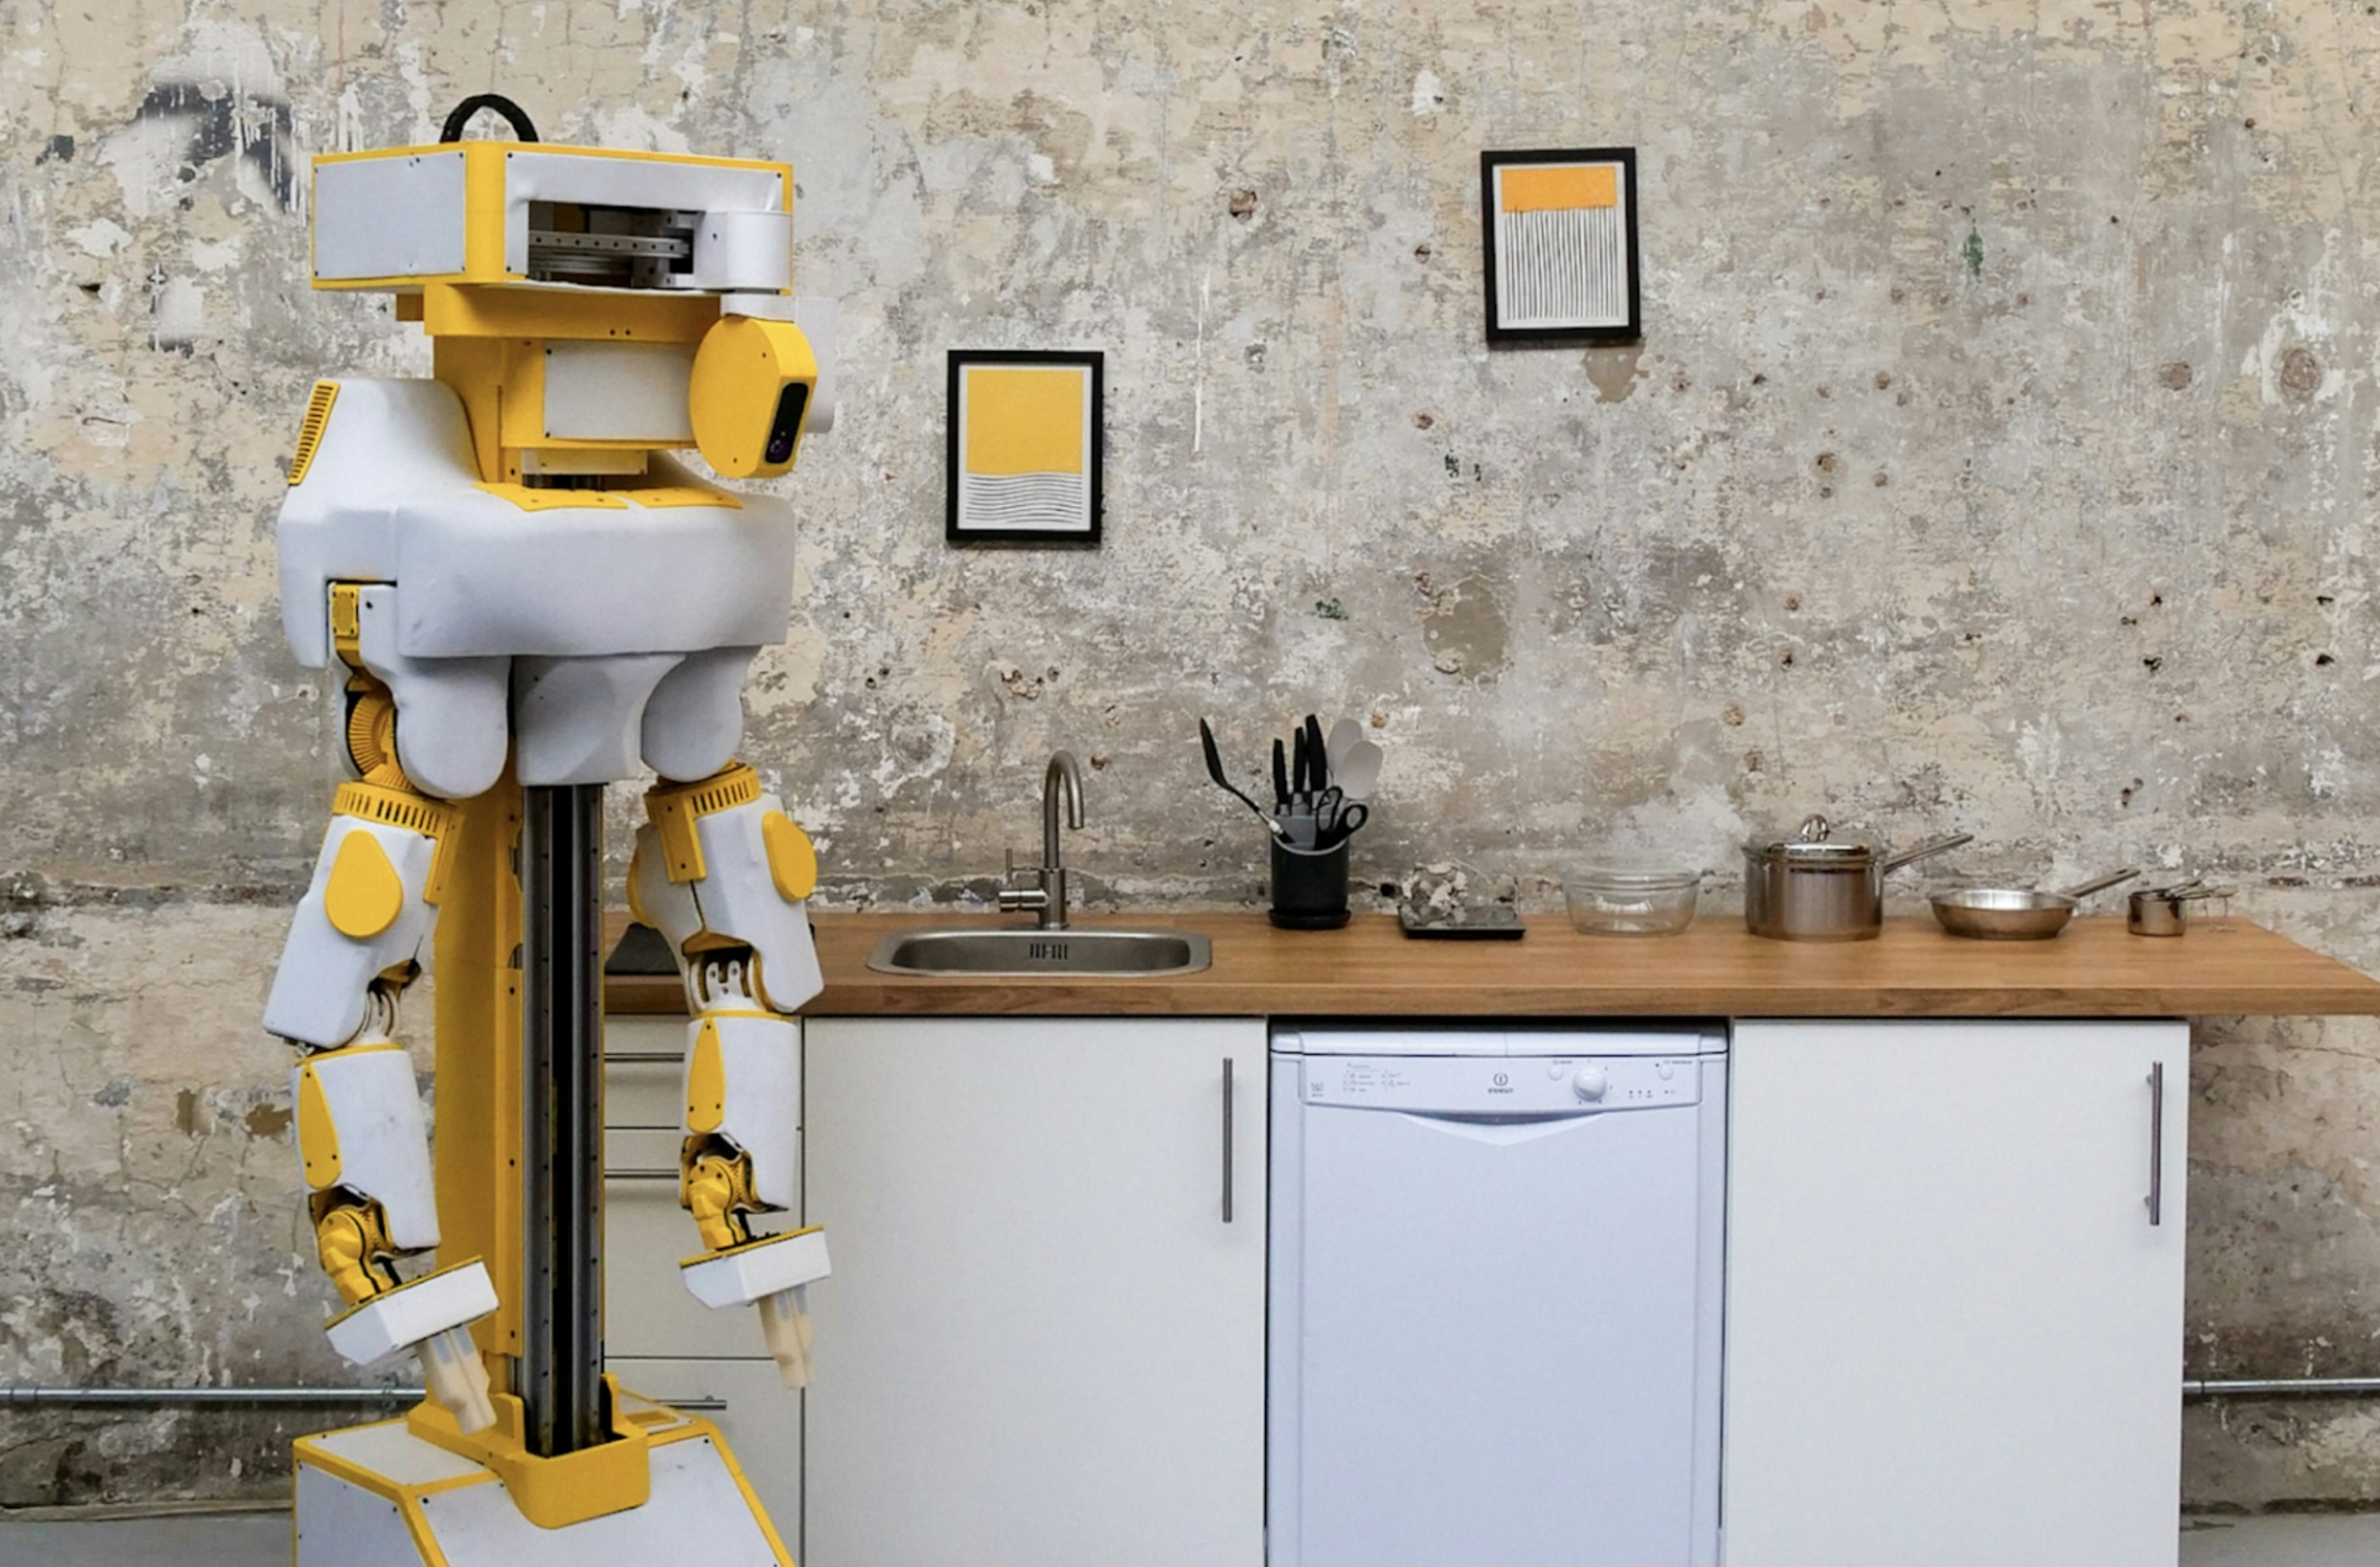 An OpenAI alum building a robot butler for your home | Sifted